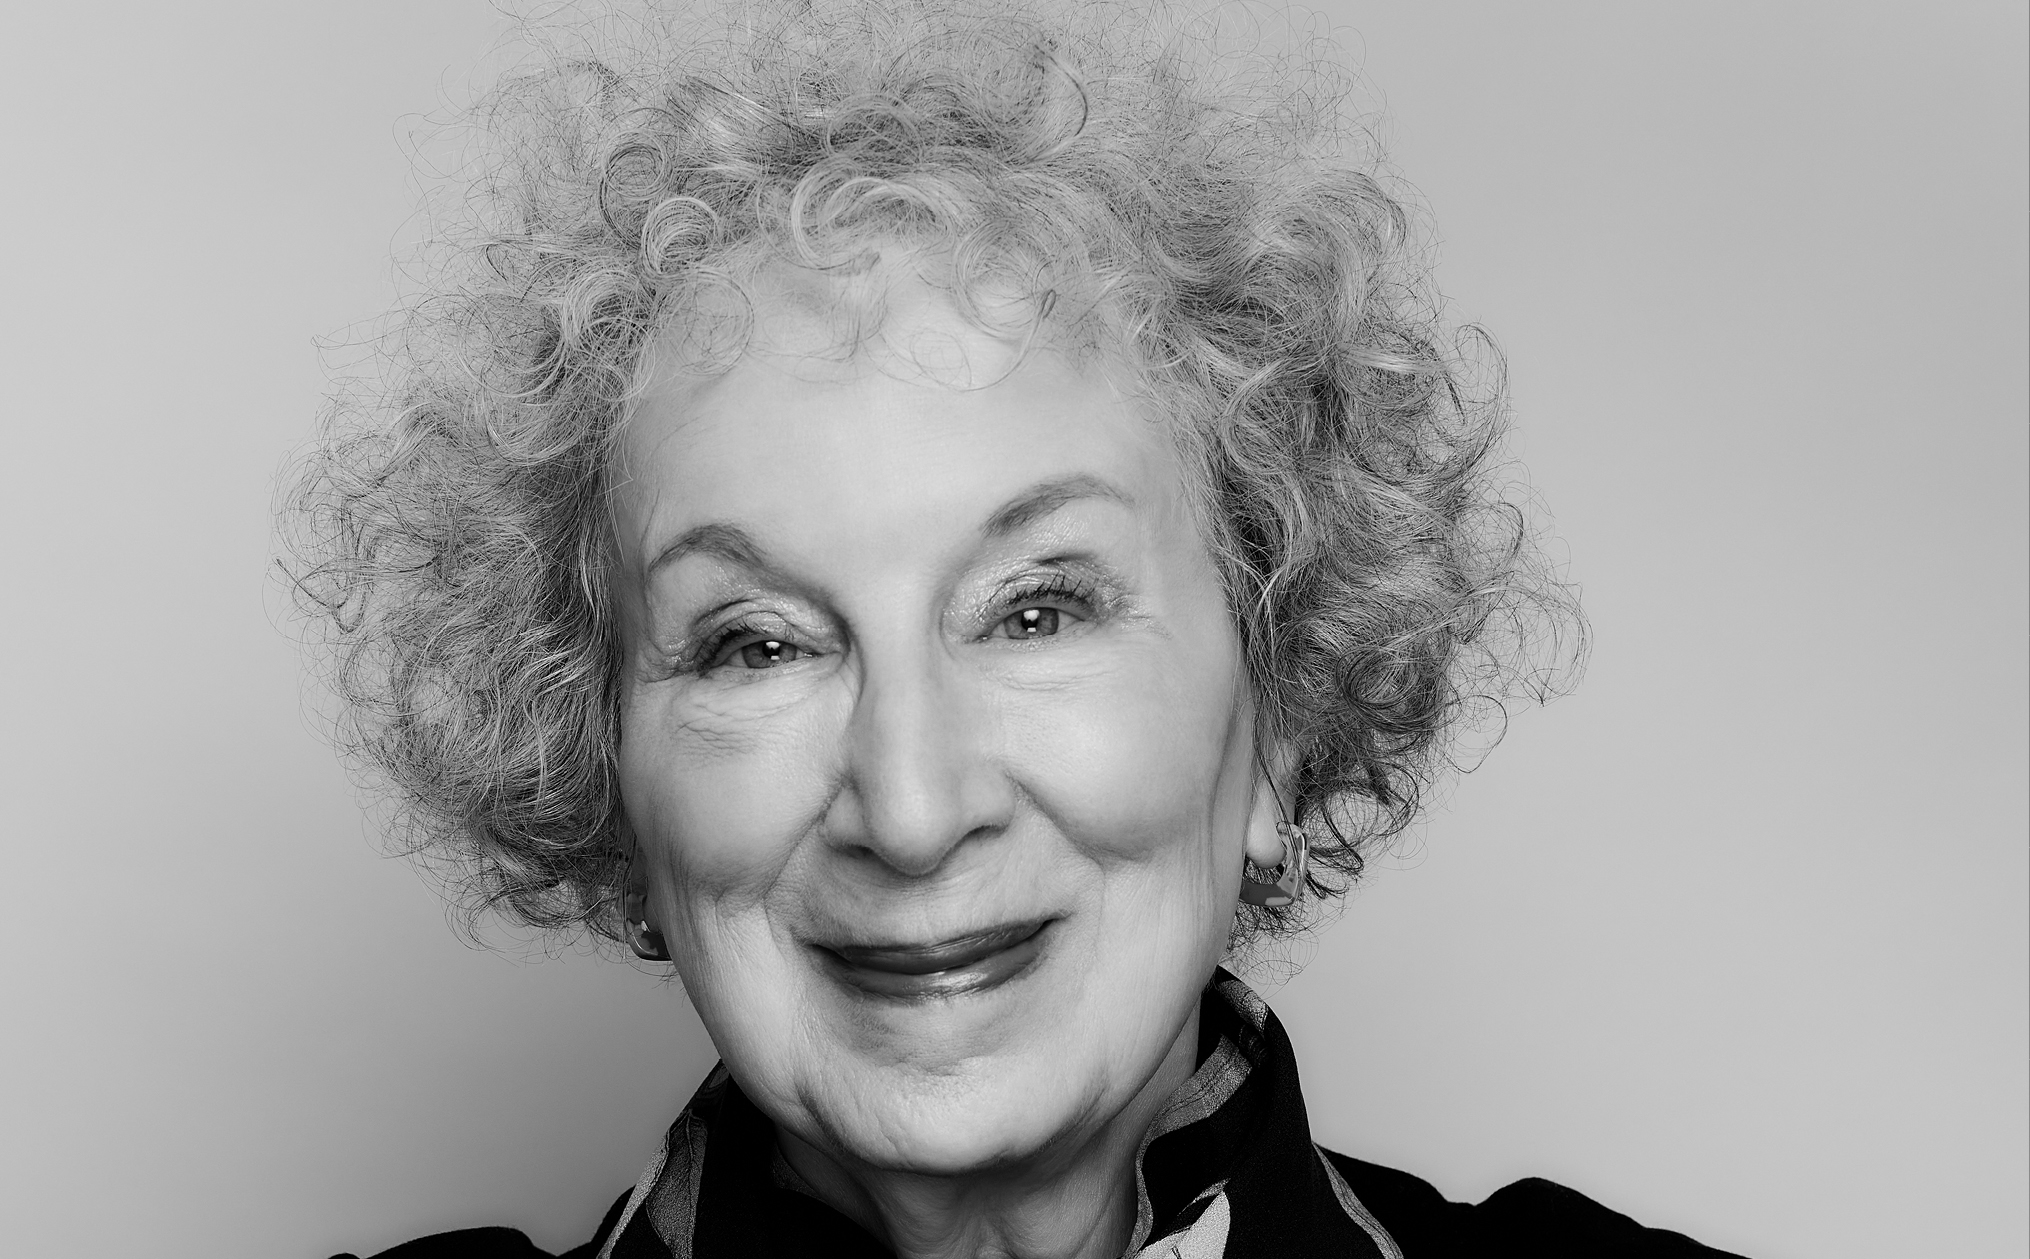 The Story of Protest: Margaret Atwood (Canada) in conversation with Julia Fermentto Tzaisler